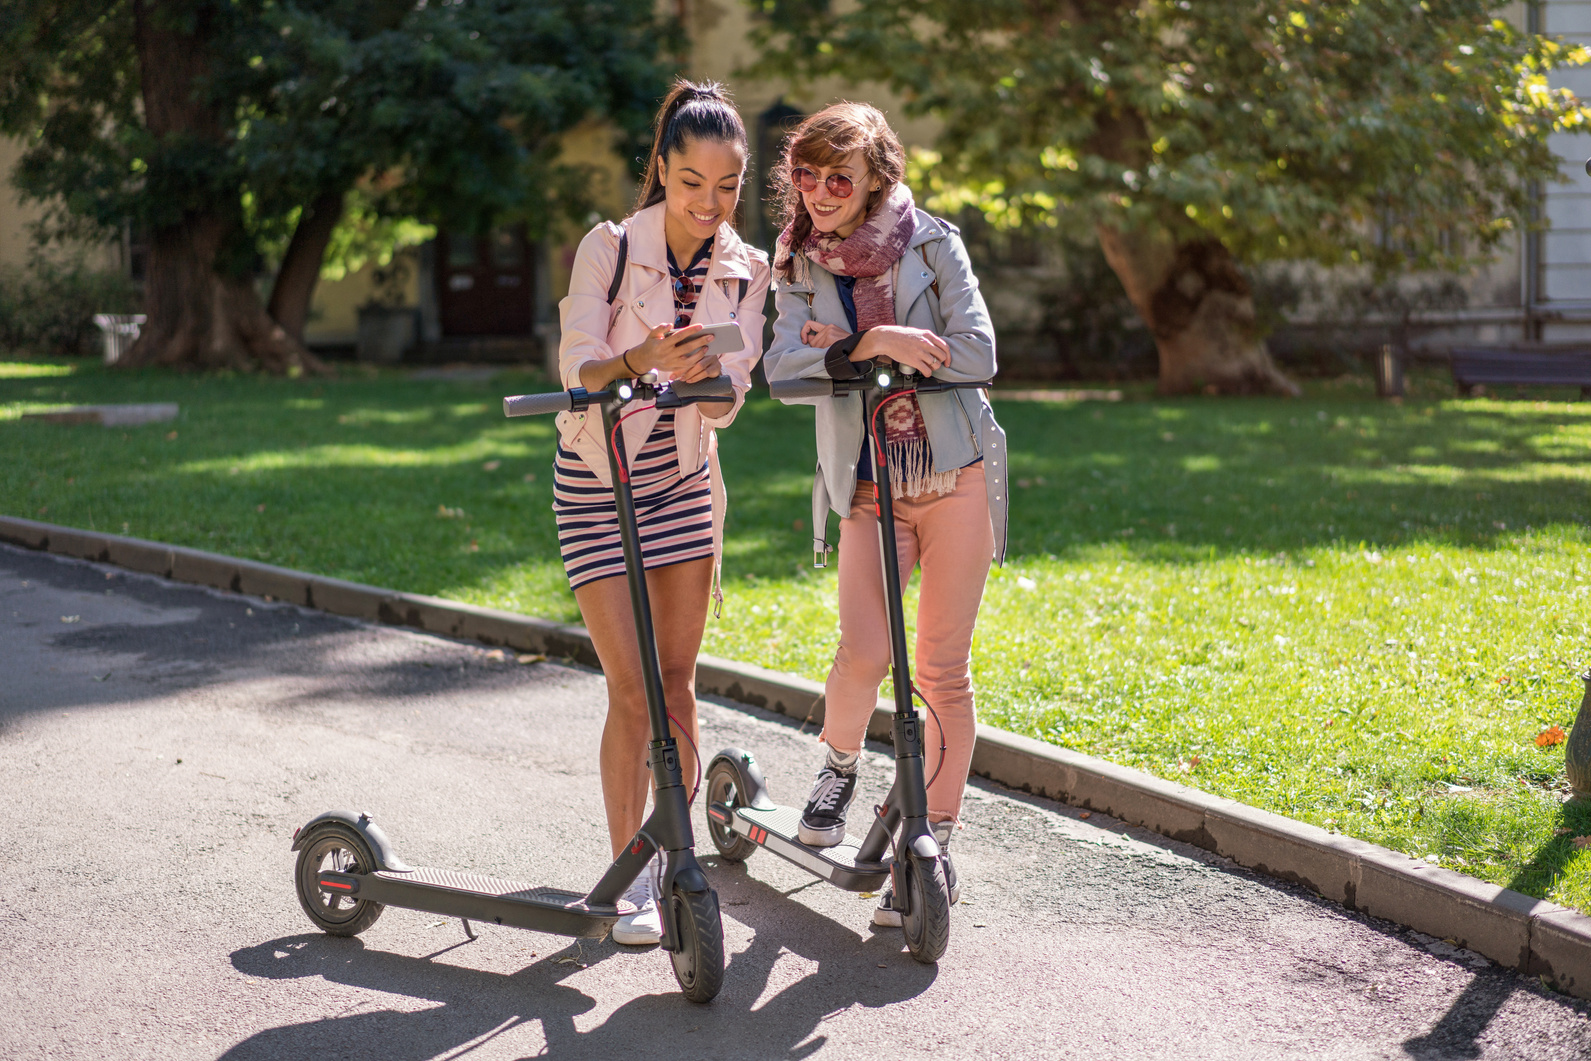 Girls renting e-scooters in the city